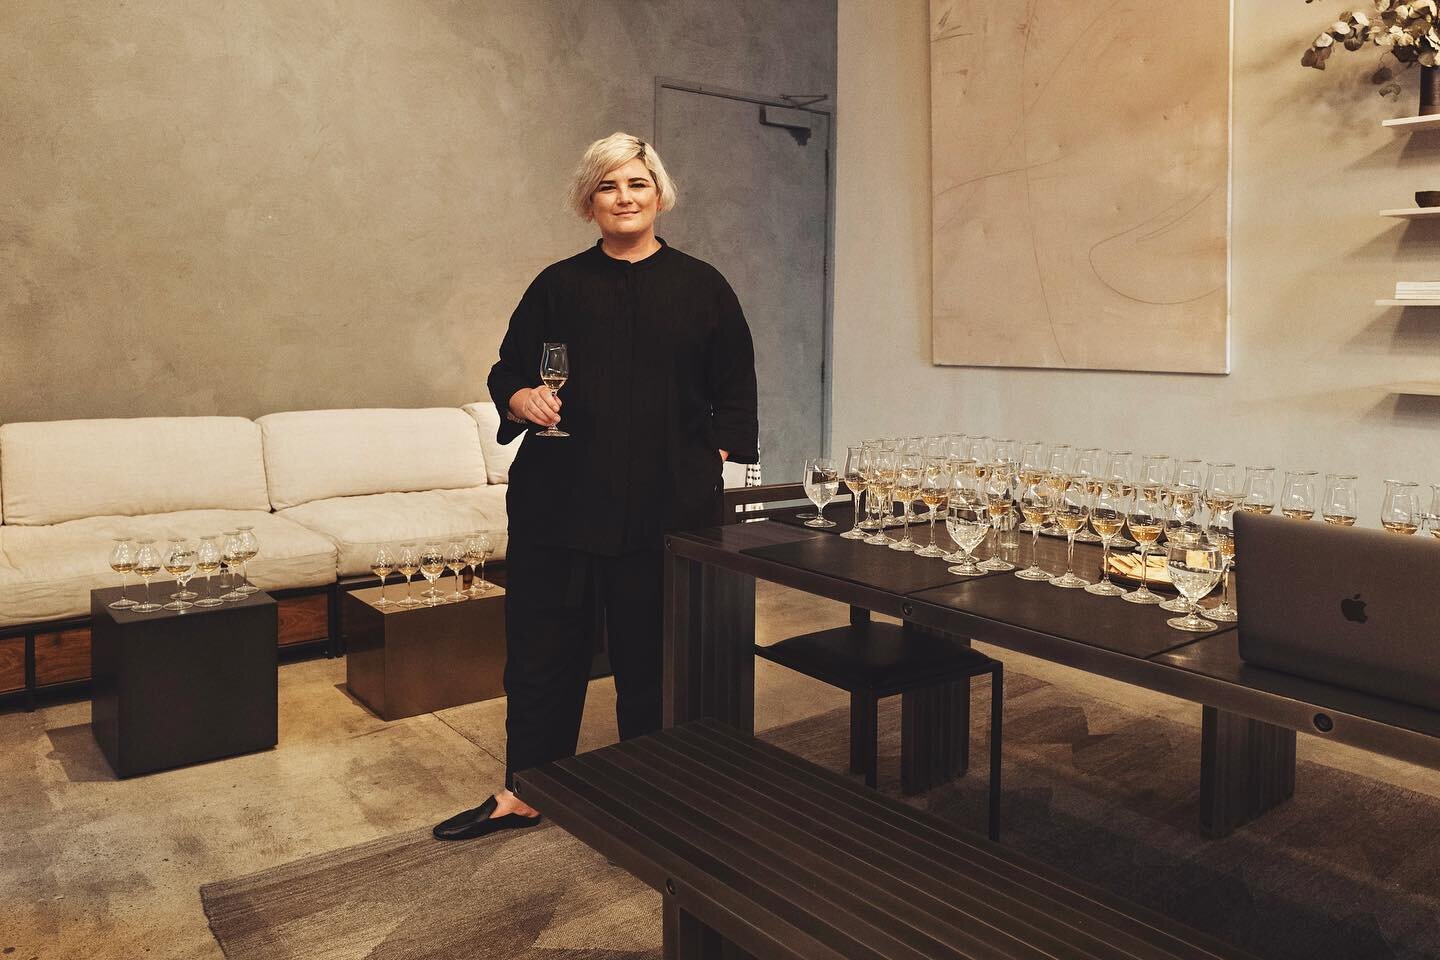 It&rsquo;s been a year and a half since the @losangeleswhiskyclub met in person. I remember club founder @beksopperman waffling back in March of last year about whether or not to cancel the in-person tasting. She opted to take the whole thing onto Zo